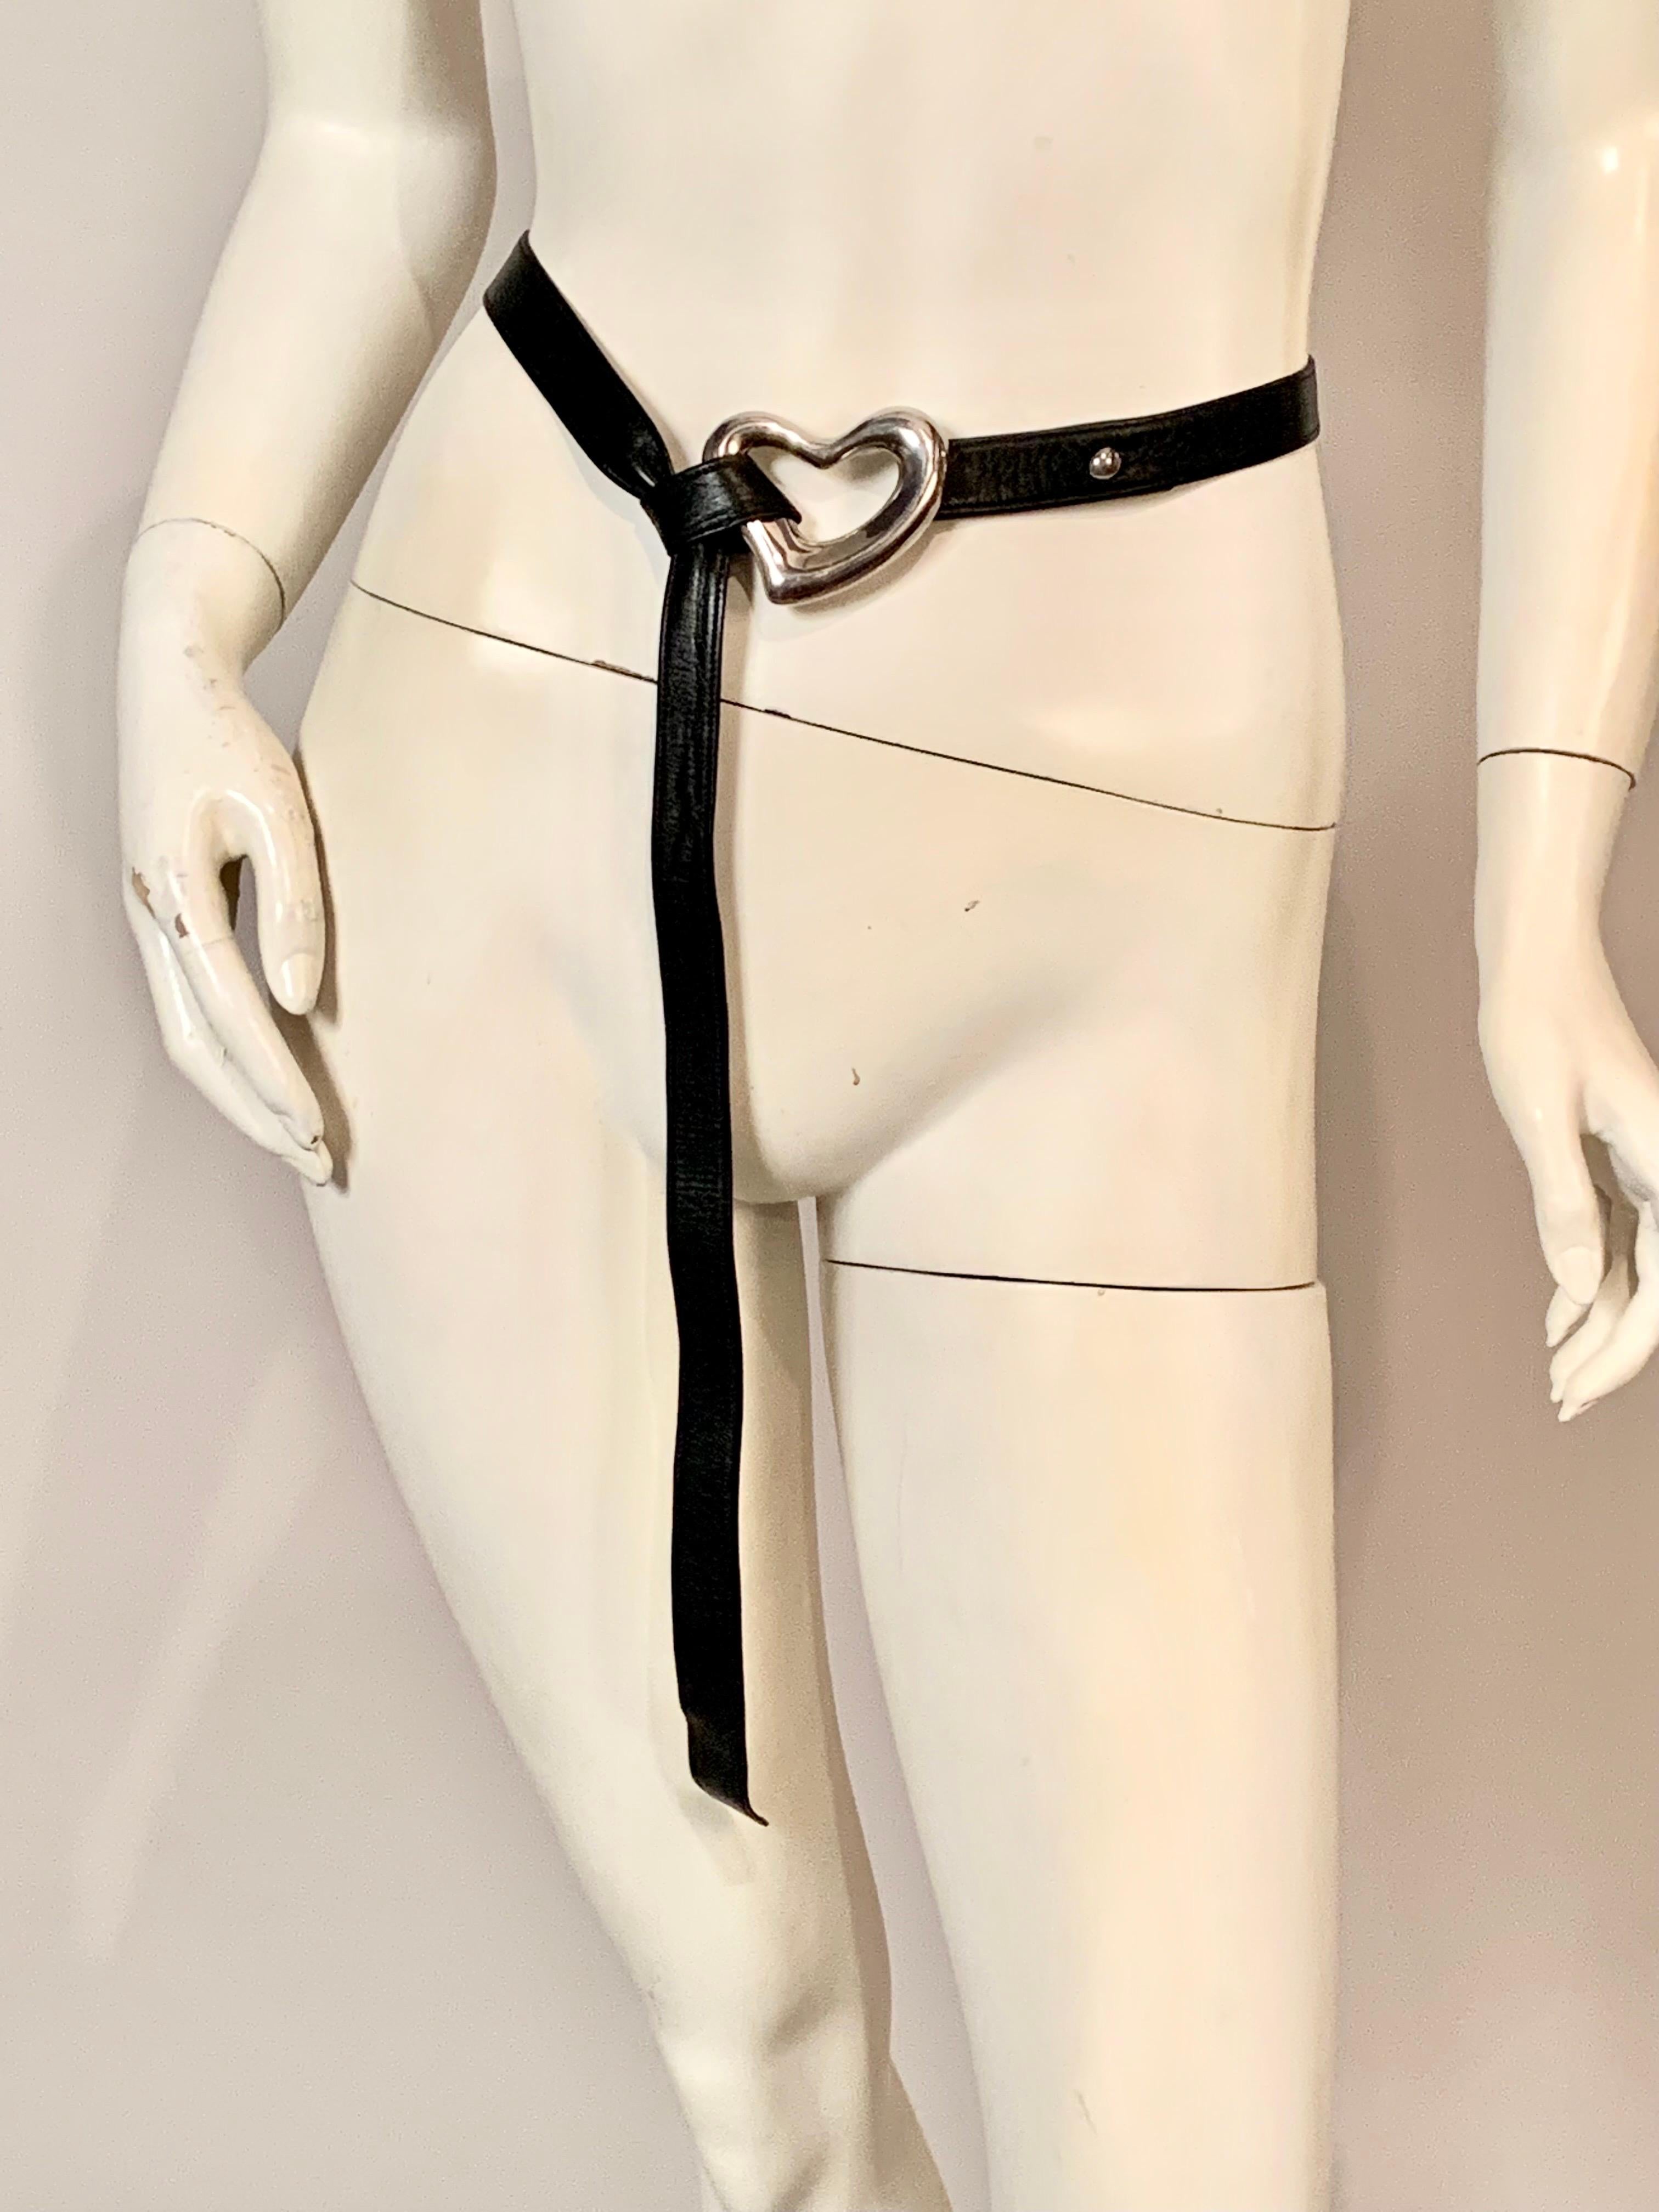 This classic and early Elsa Peretti belt is dated 1975, and it is from the very early years of her collaboration with Halston and Tiffany & Co.  There is a sterling button to secure the buckle to the belt marked Peretti and Tiffany, and two leather